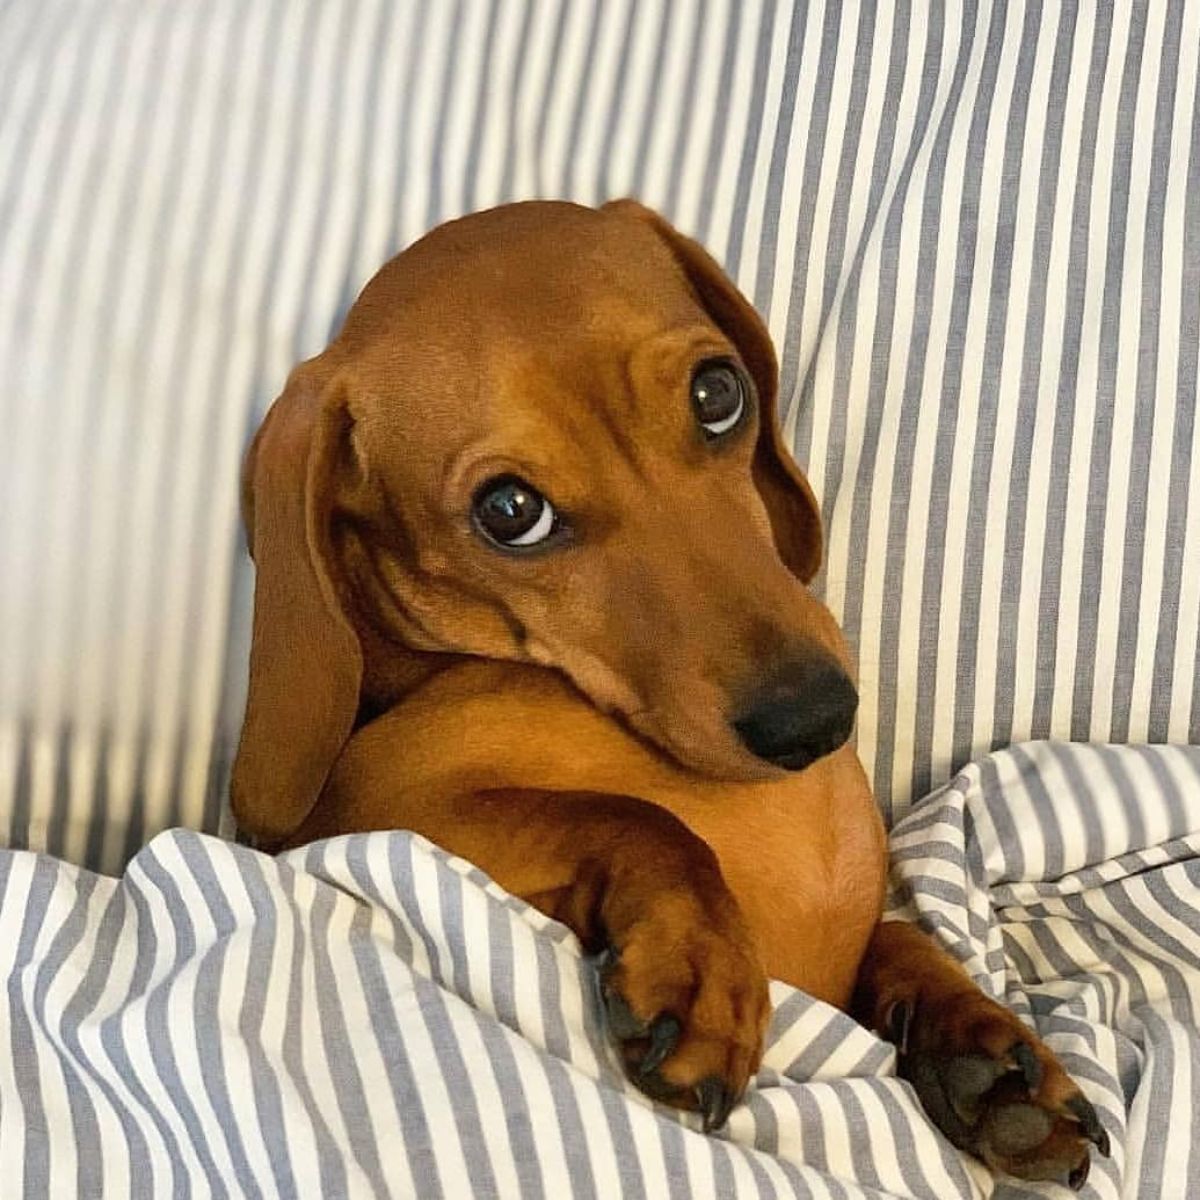 brown dachshund looking at the camera while sleeping on a bed under a striped blanket